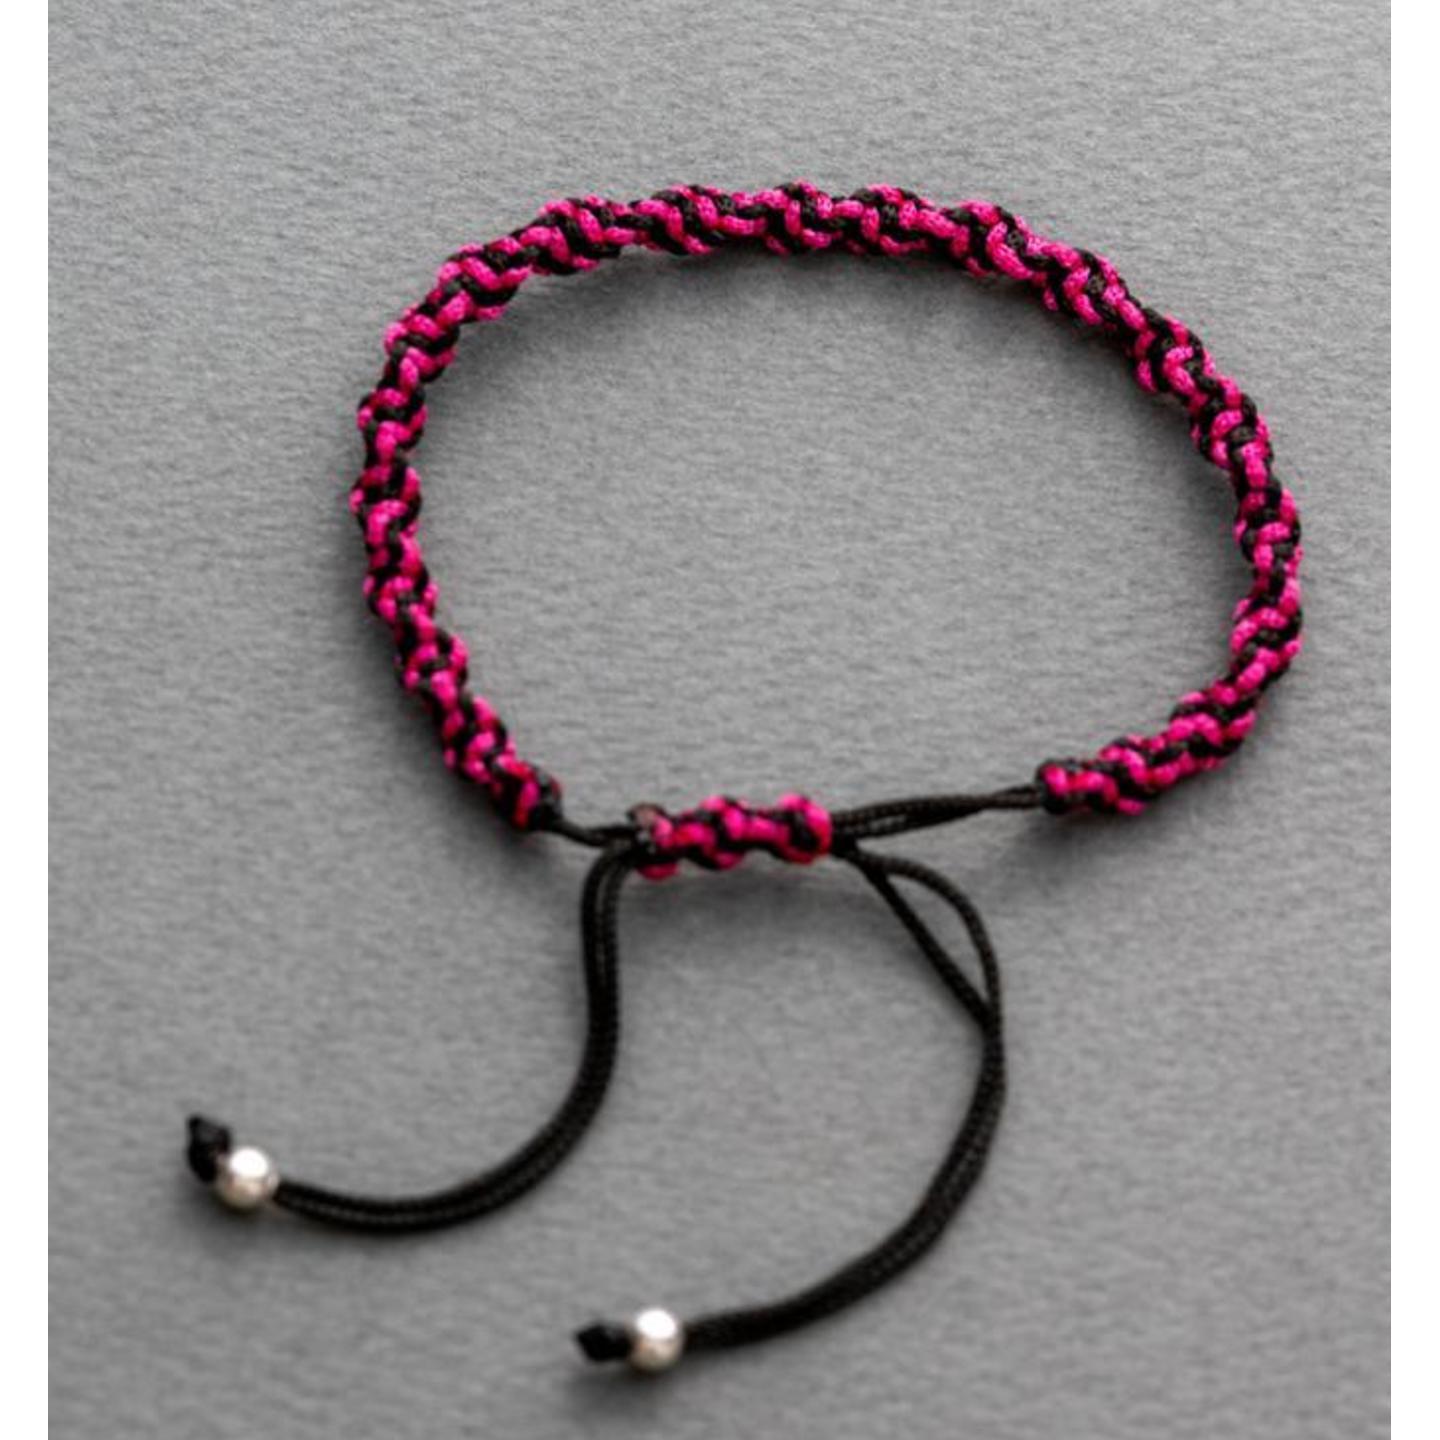 Thread Bracelet with Silver Ball for Men and Women